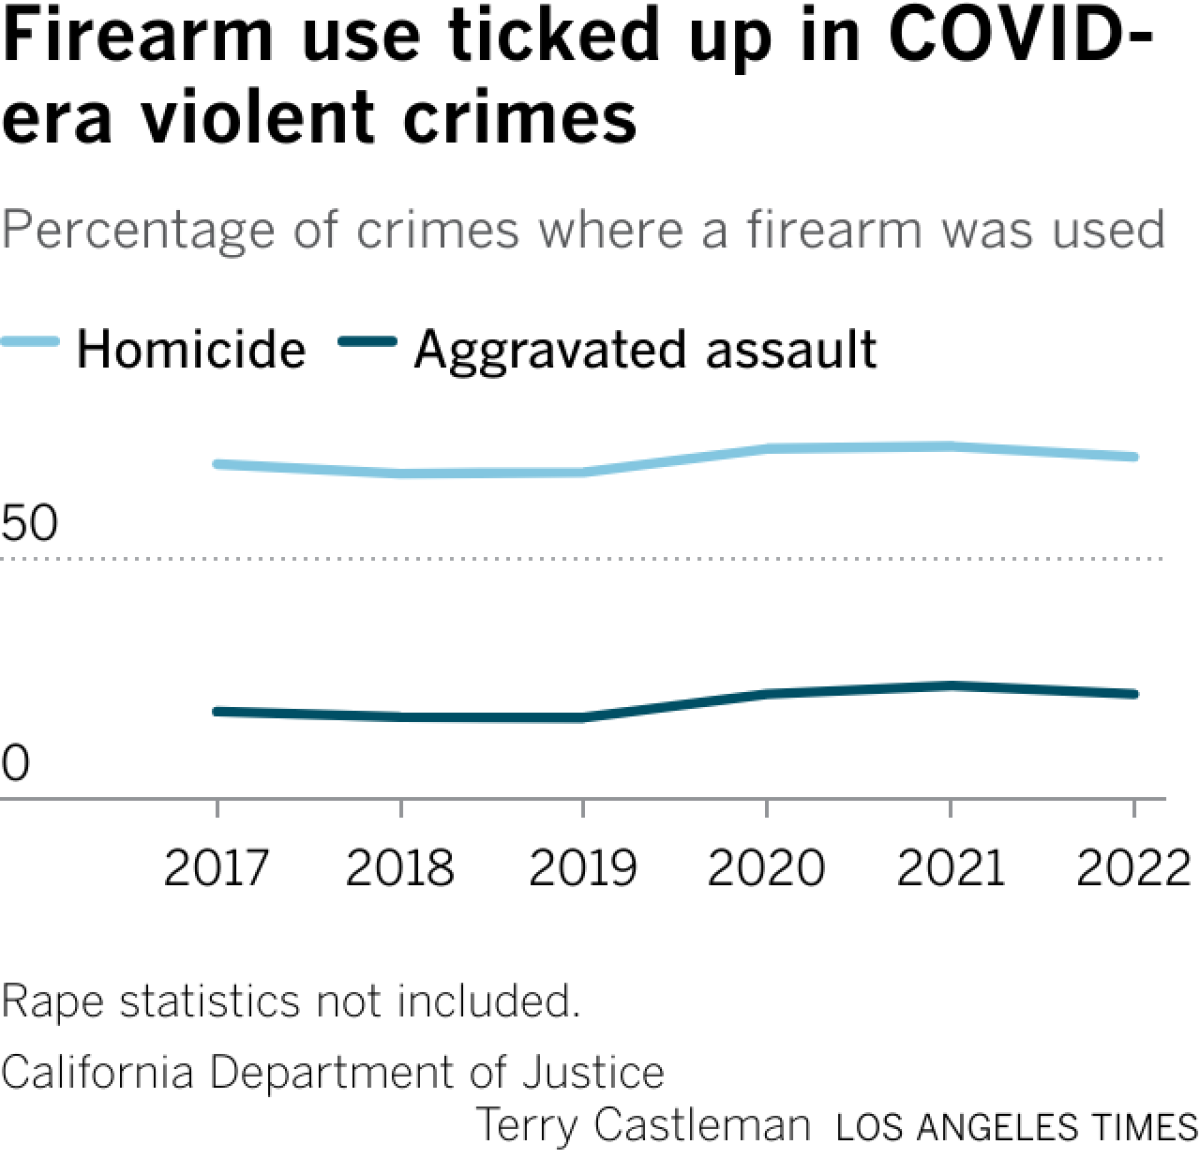 Chart shows increasing rates of firearm use in homicides and assaults